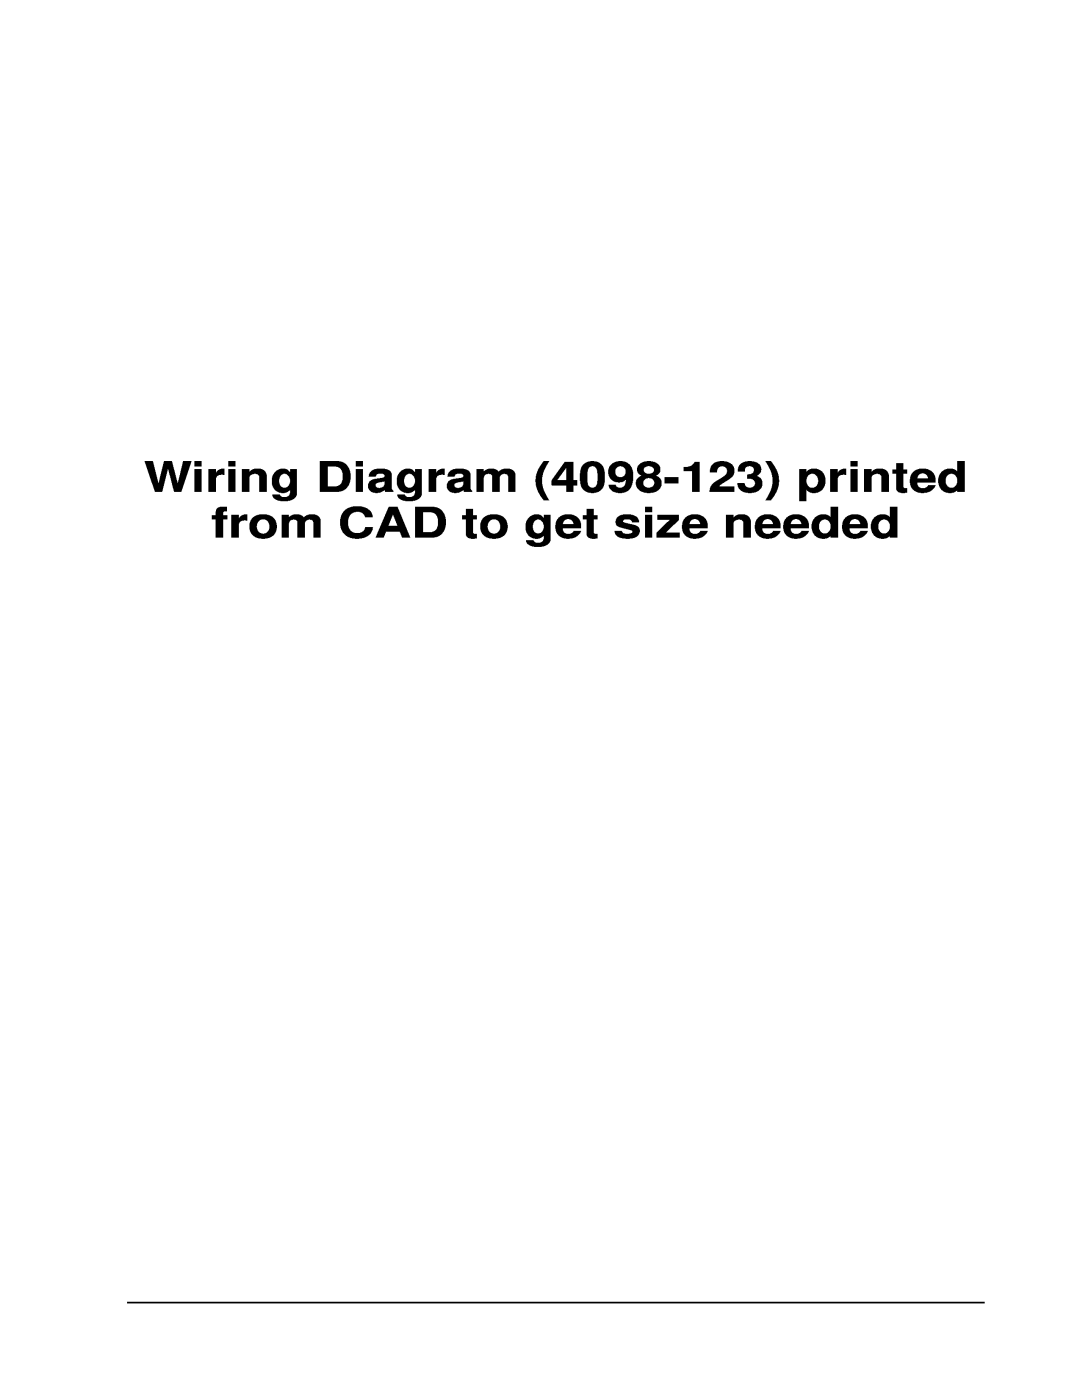 Bard PH1230, PH1236, PH1224 Wiring Diagram 4098-123printed, from CAD to get size needed, Manual 2100-344Page 